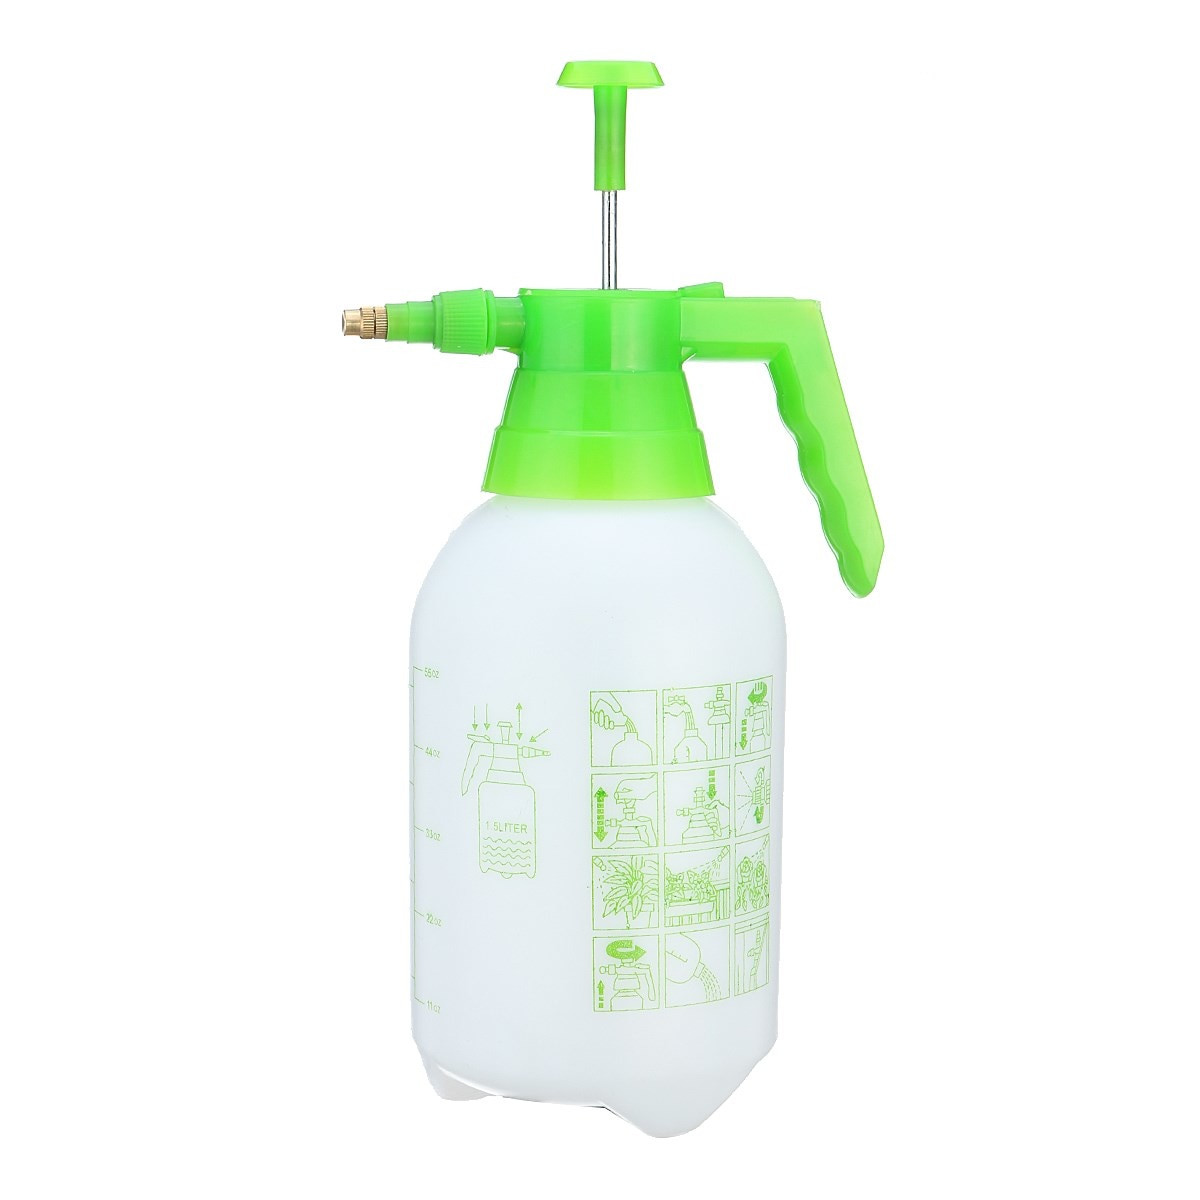 17 Trendy White Watering Can Vase 2024 free download white watering can vase of 1 5l handheld watering can bottle sprayer plants weeds pump pressure with regard to 1 5l handheld watering can bottle sprayer plants weeds pump pressure water spra